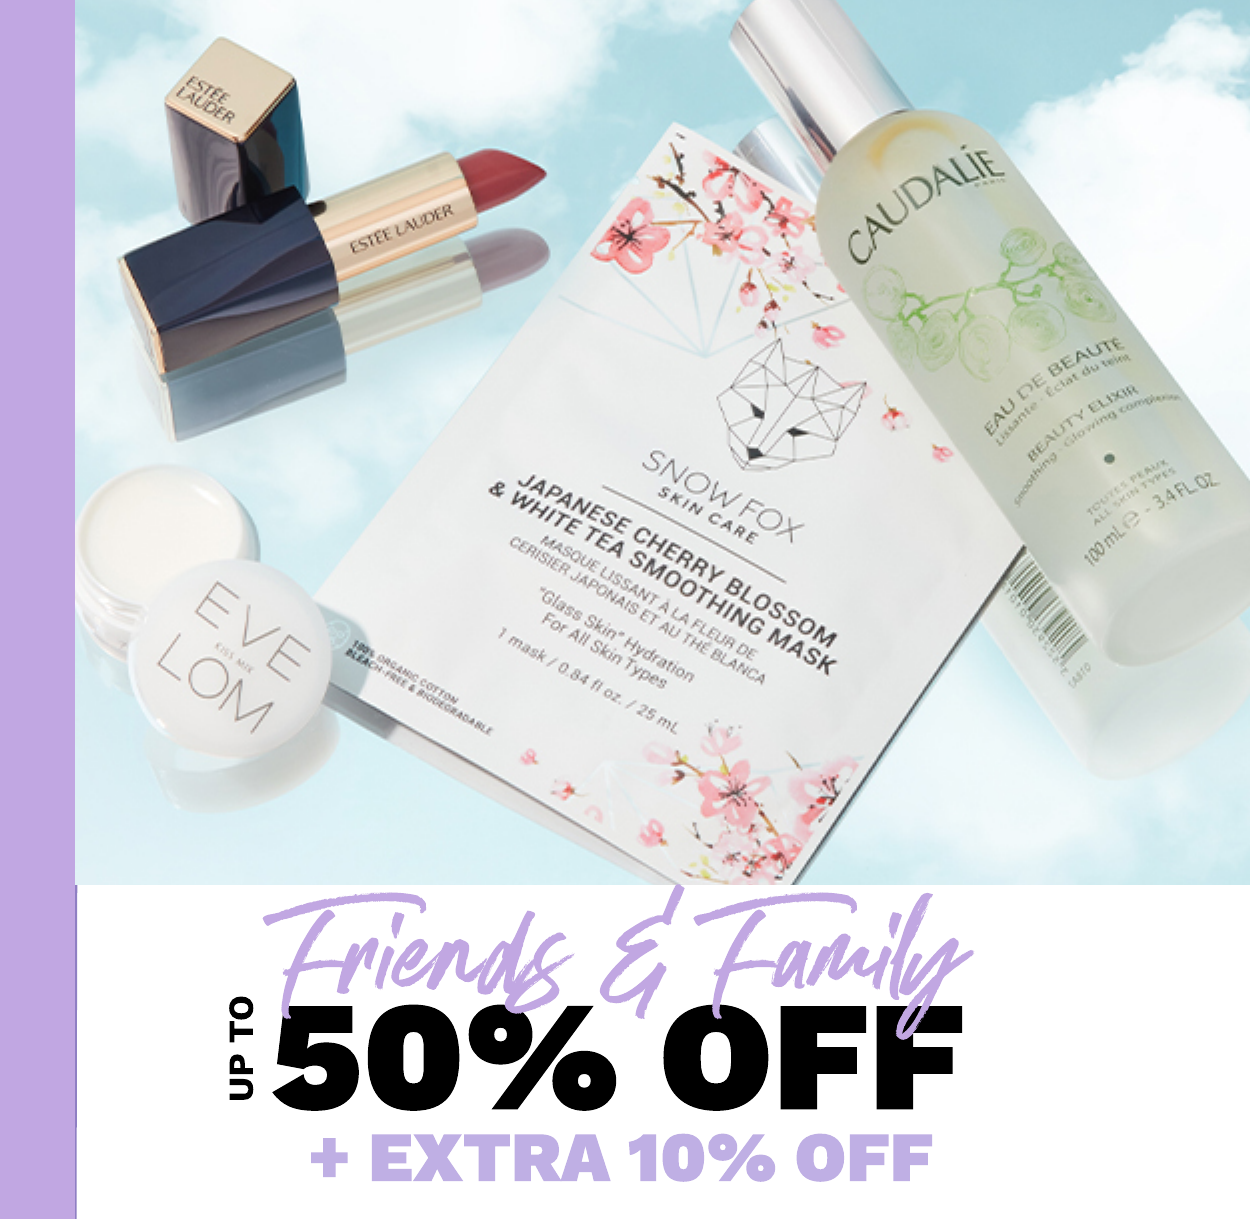 Ends Tonight: Look Fantastic Friends & Family Sale, Up to 50% Off + Extra 10% Coupon